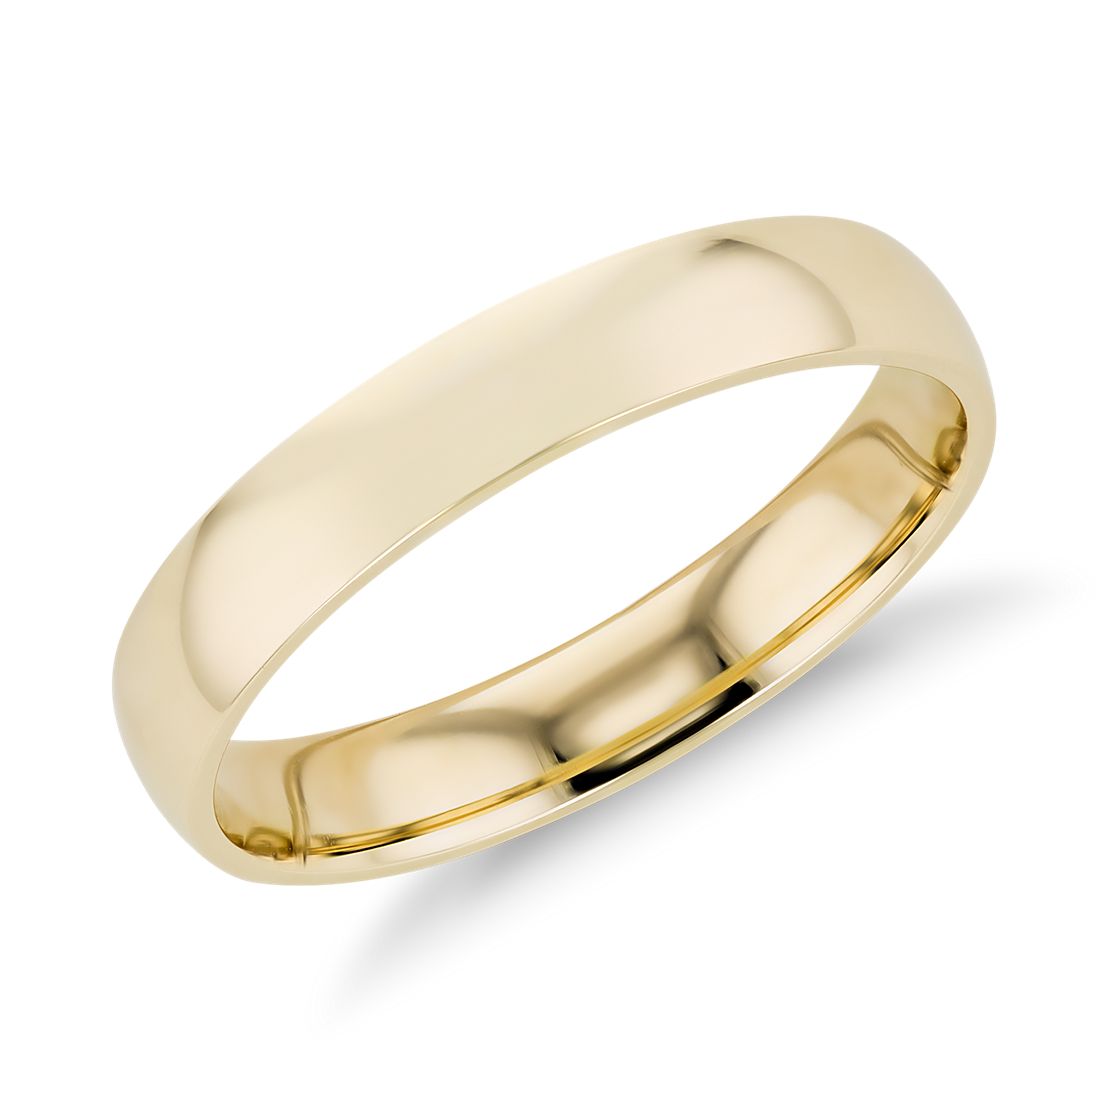 Details about   14k Yellow Gold 4-mm UNISEX Standard-fit Polished Wedding Band 